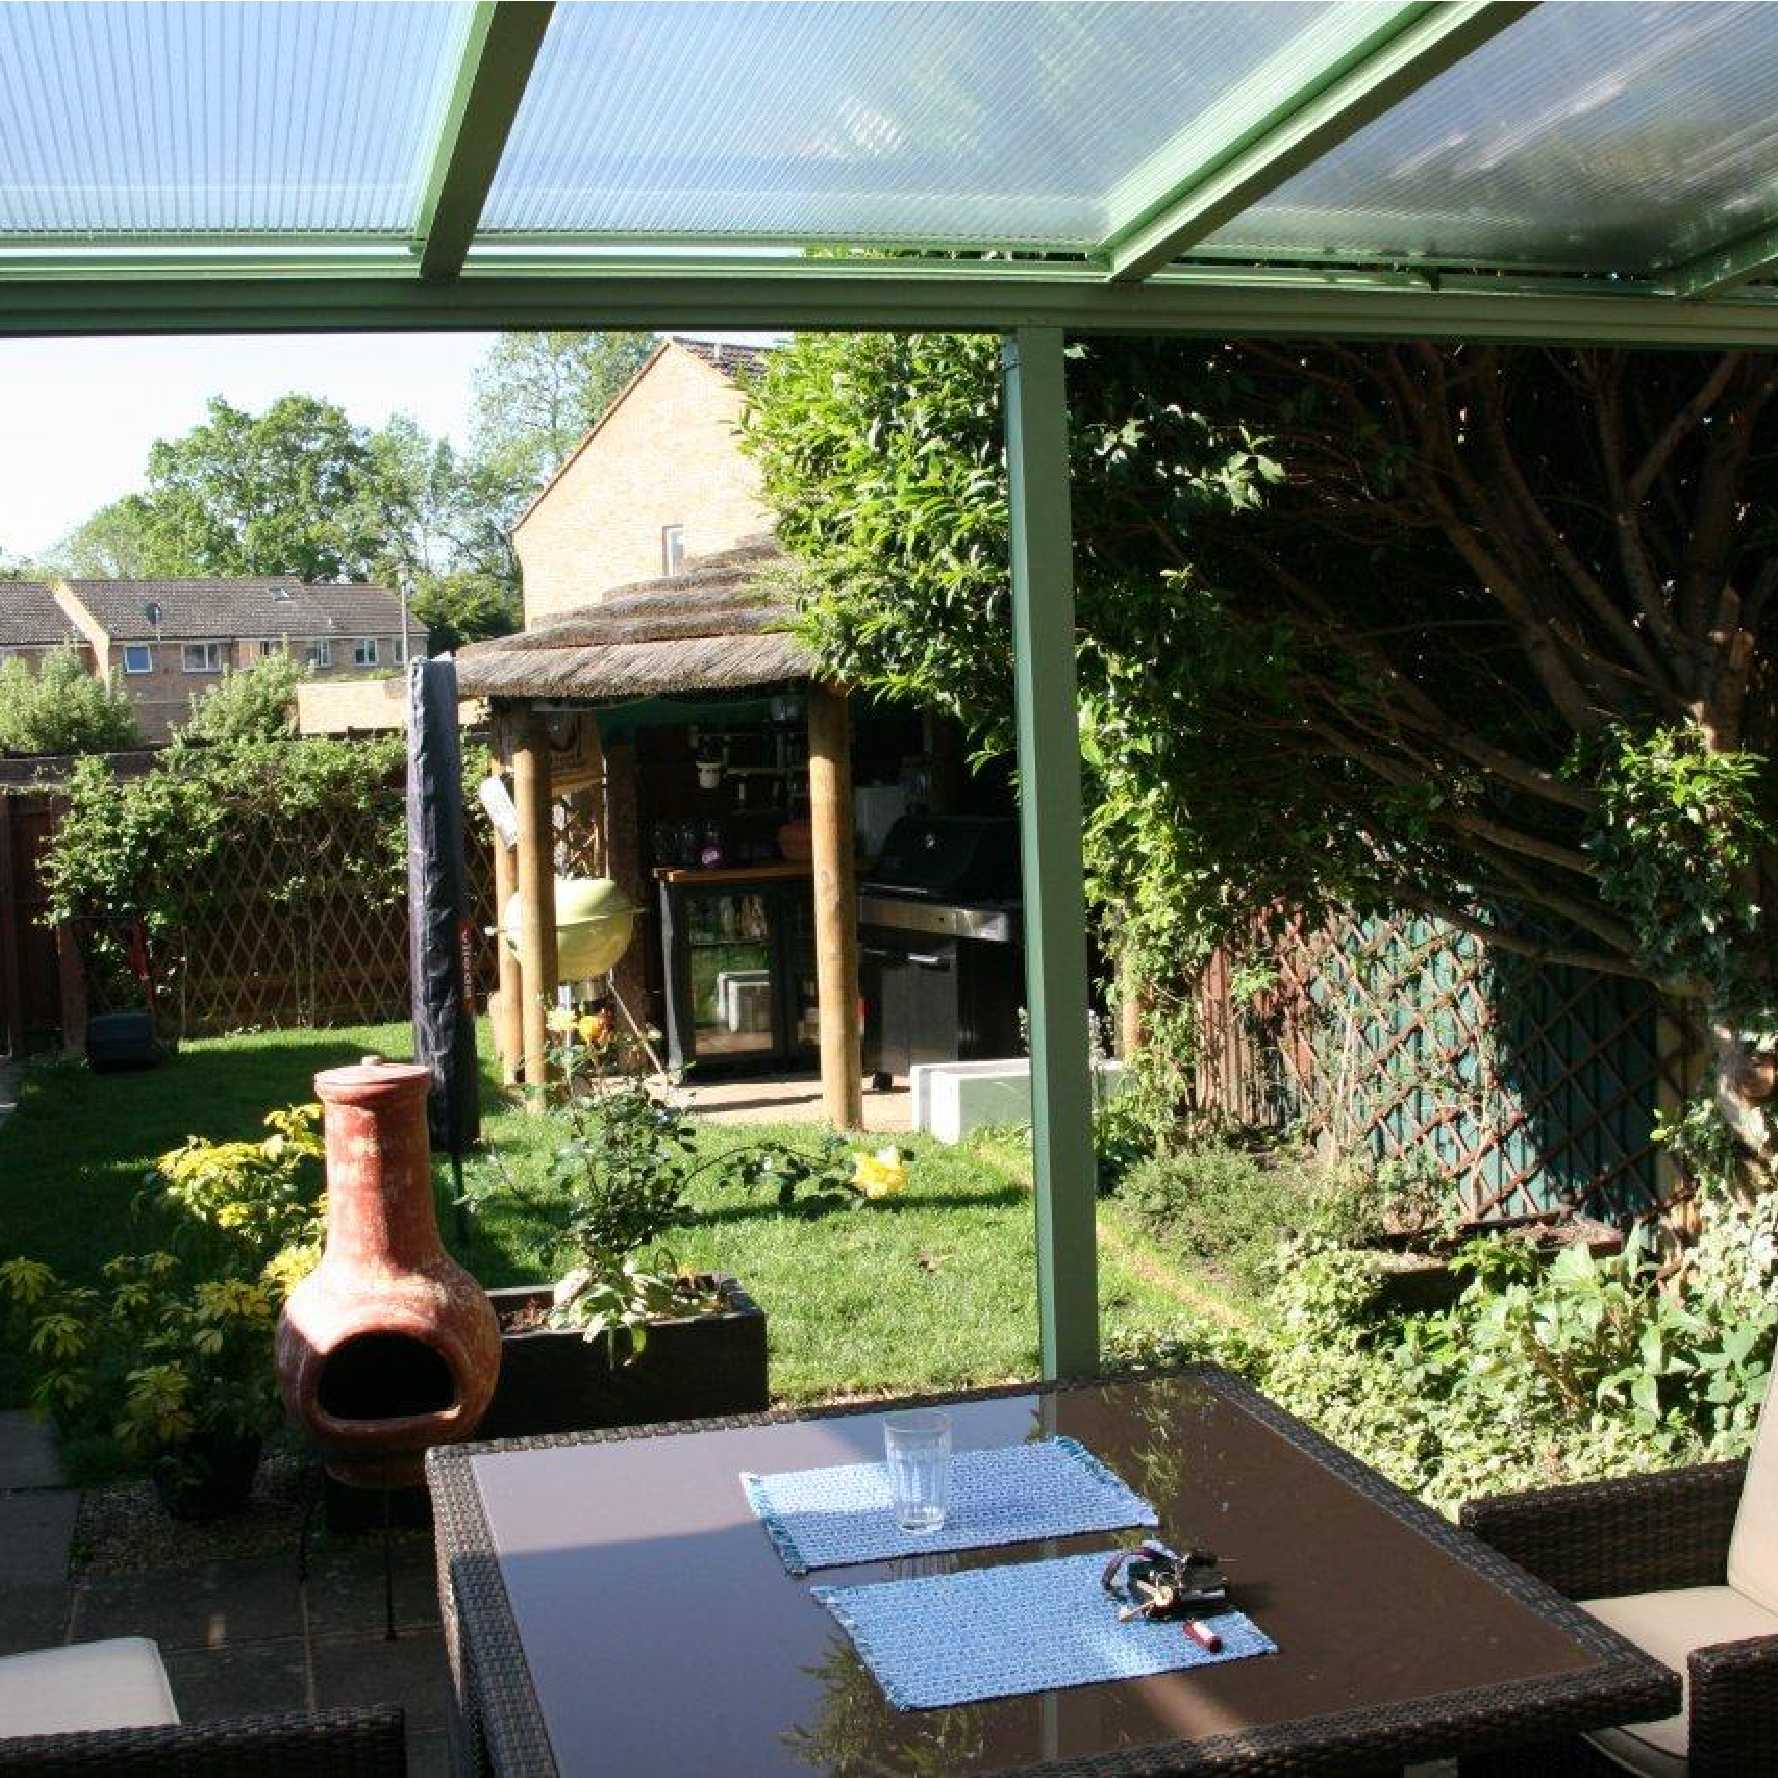 Affordable Omega Smart Lean-To Canopy, White with 16mm Polycarbonate Glazing - 7.0m (W) x 4.5m (P), (4) Supporting Posts